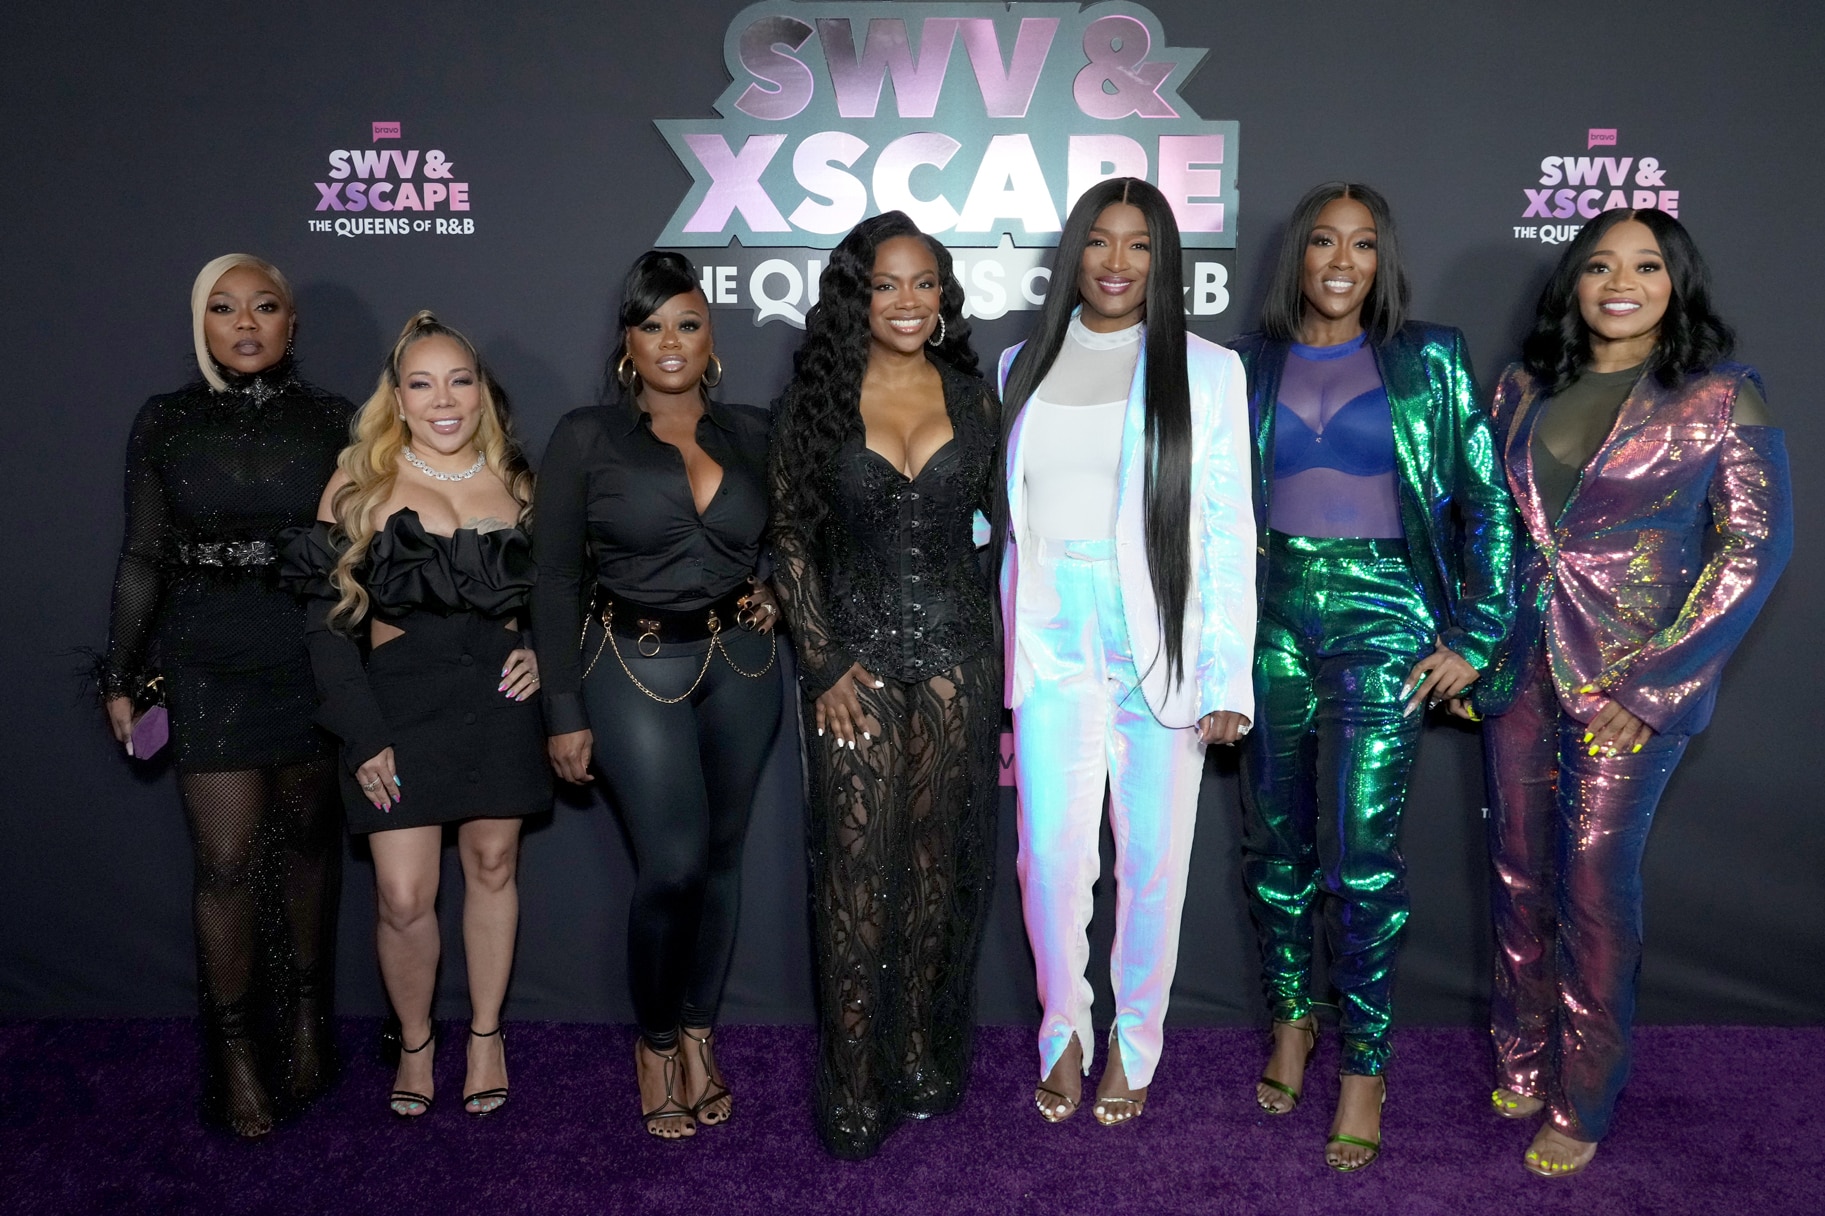 Which ’90s Fashion Trends Would SWV and XSCAPE Still Wear?